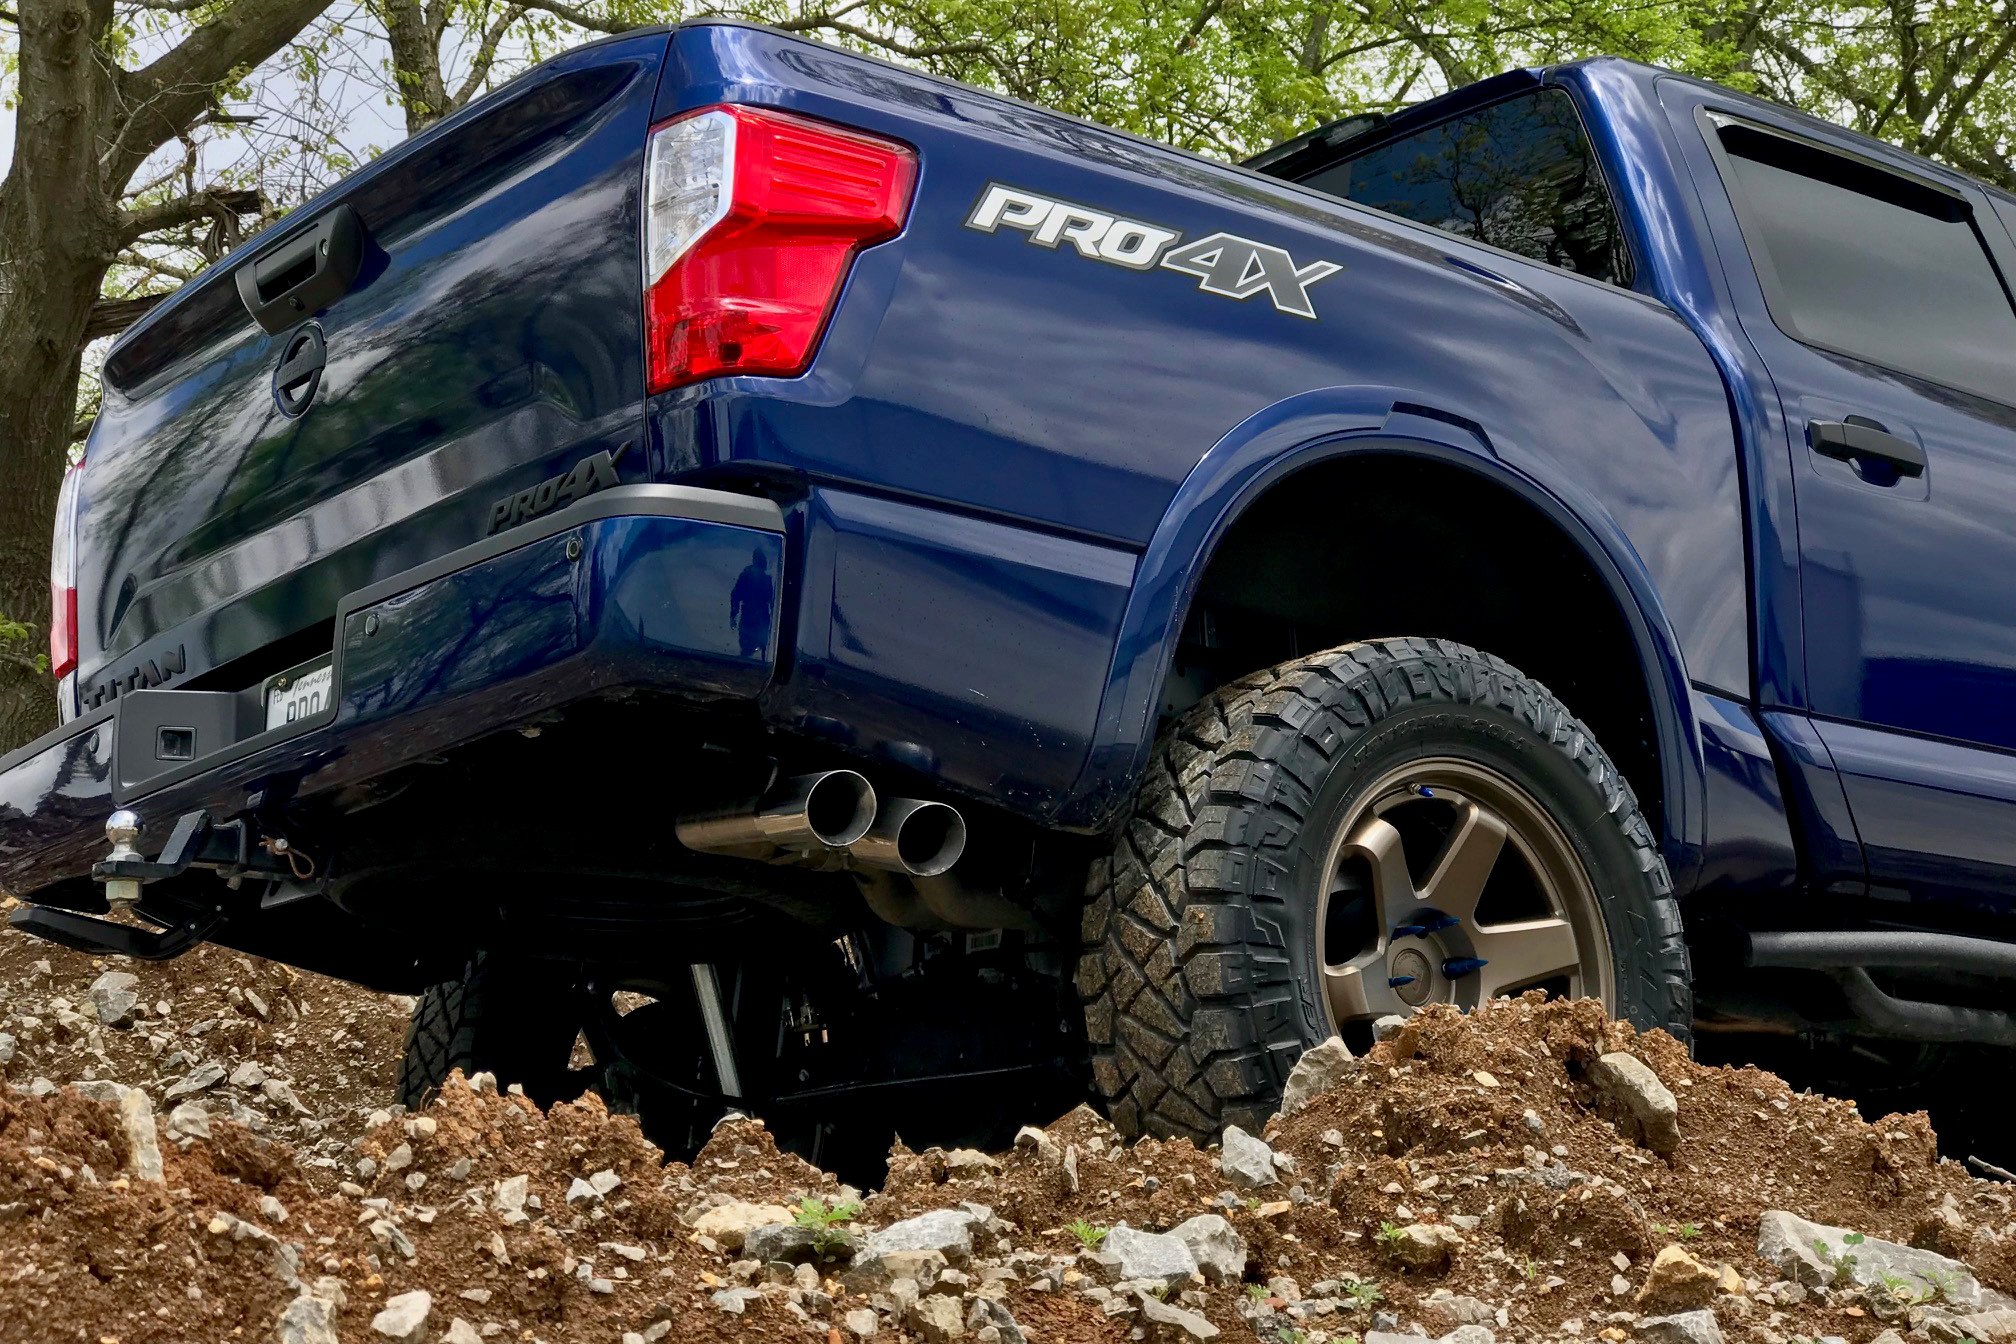 Aftermarket Exhaust System on Blue Nissan Titan V8 - Photo by Black Rhino Wheels